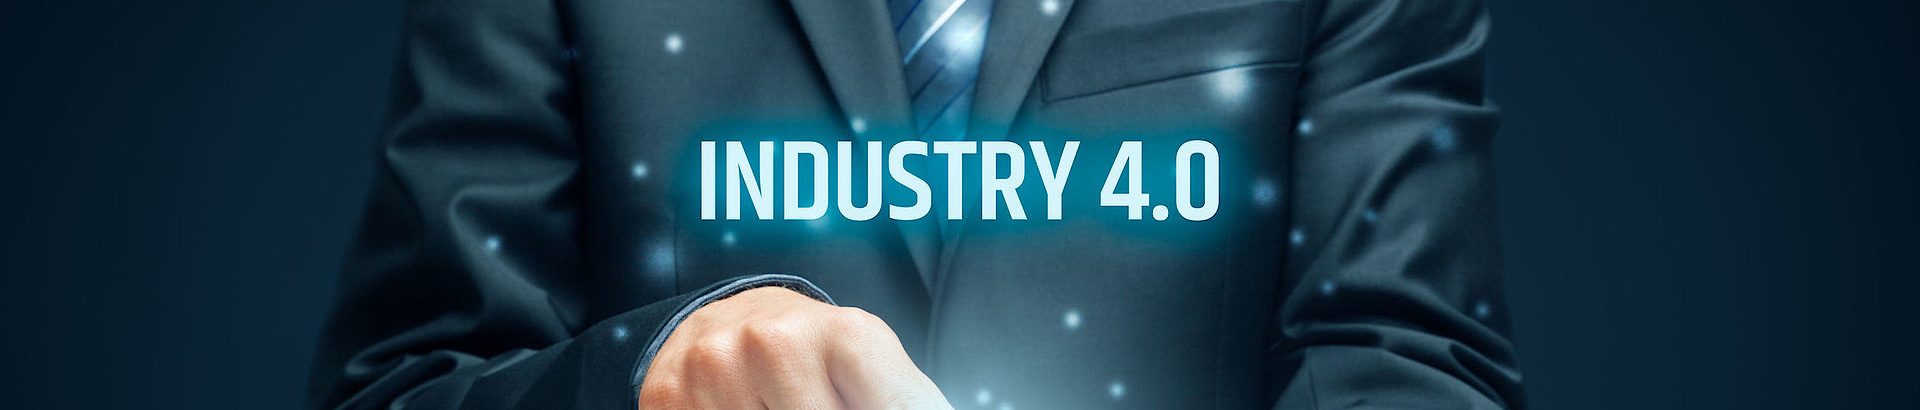 Industry 4.0 Making Smart Automation of Production Systems Available